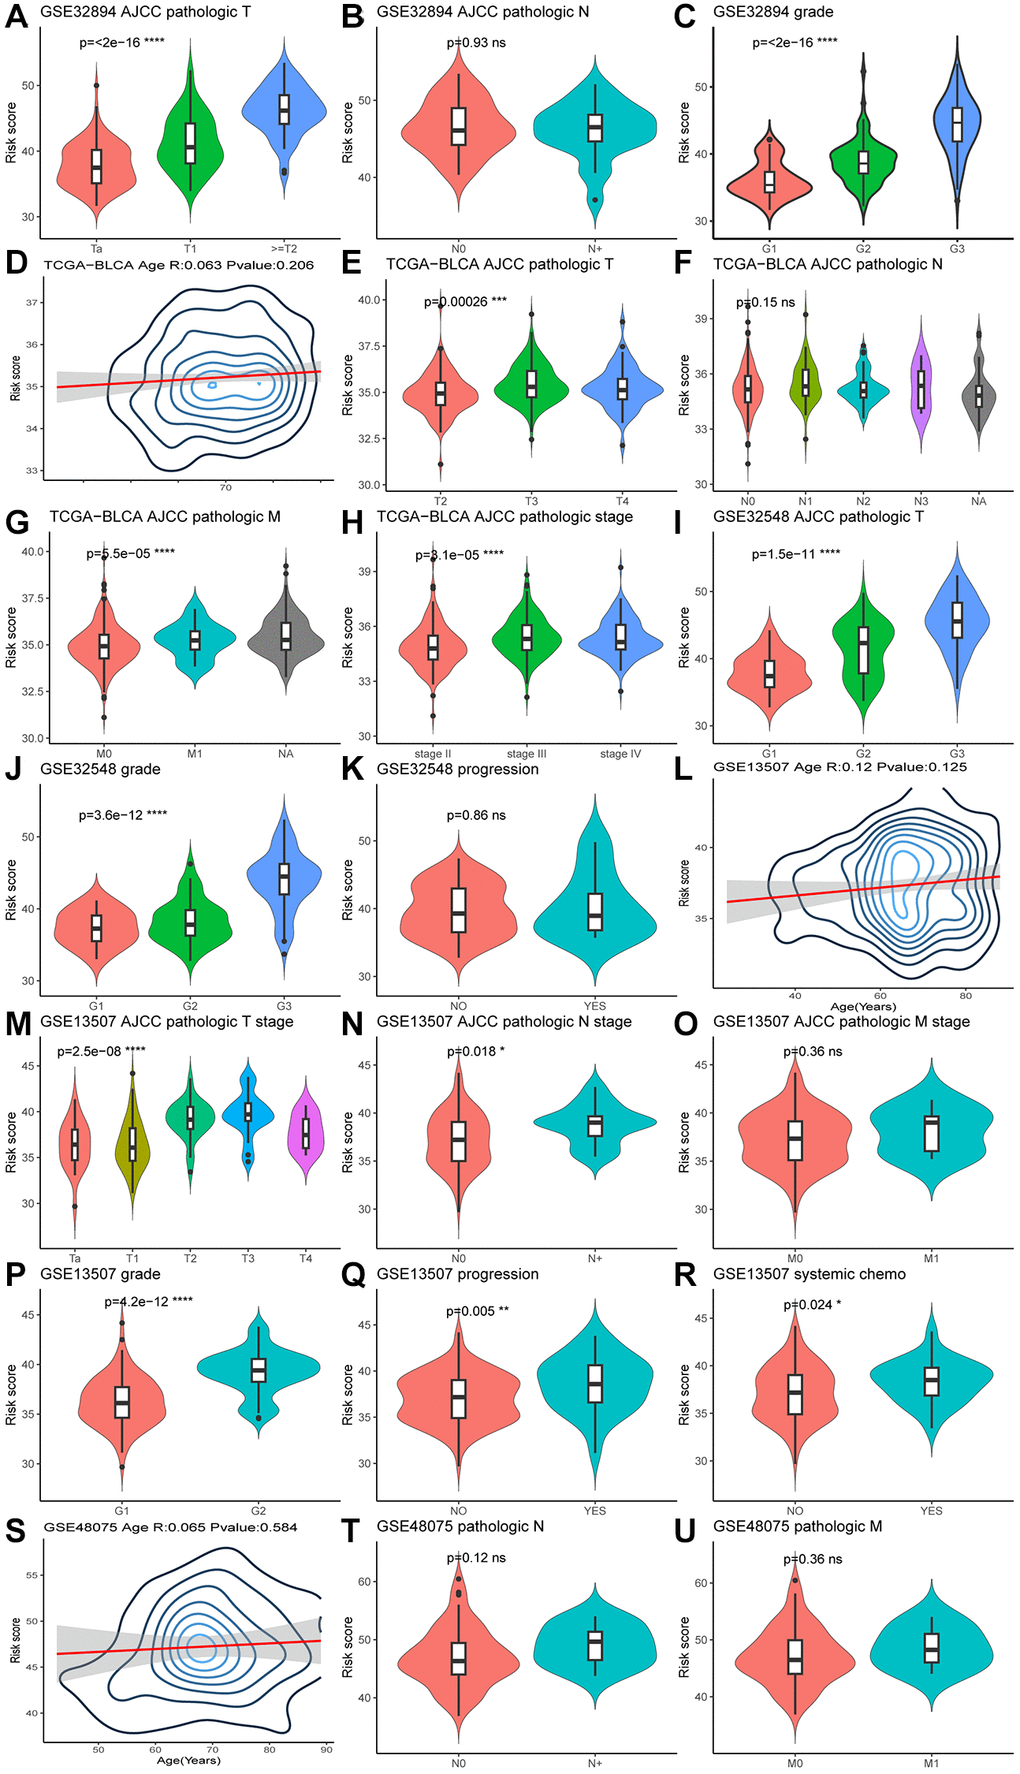 Violin plots (A–U) illustrate the relationship between clinical factors and risk scores, employing the Wilcoxon test for comparisons between two variables and the Kruskal-Wallis test for comparisons among more than two variables.